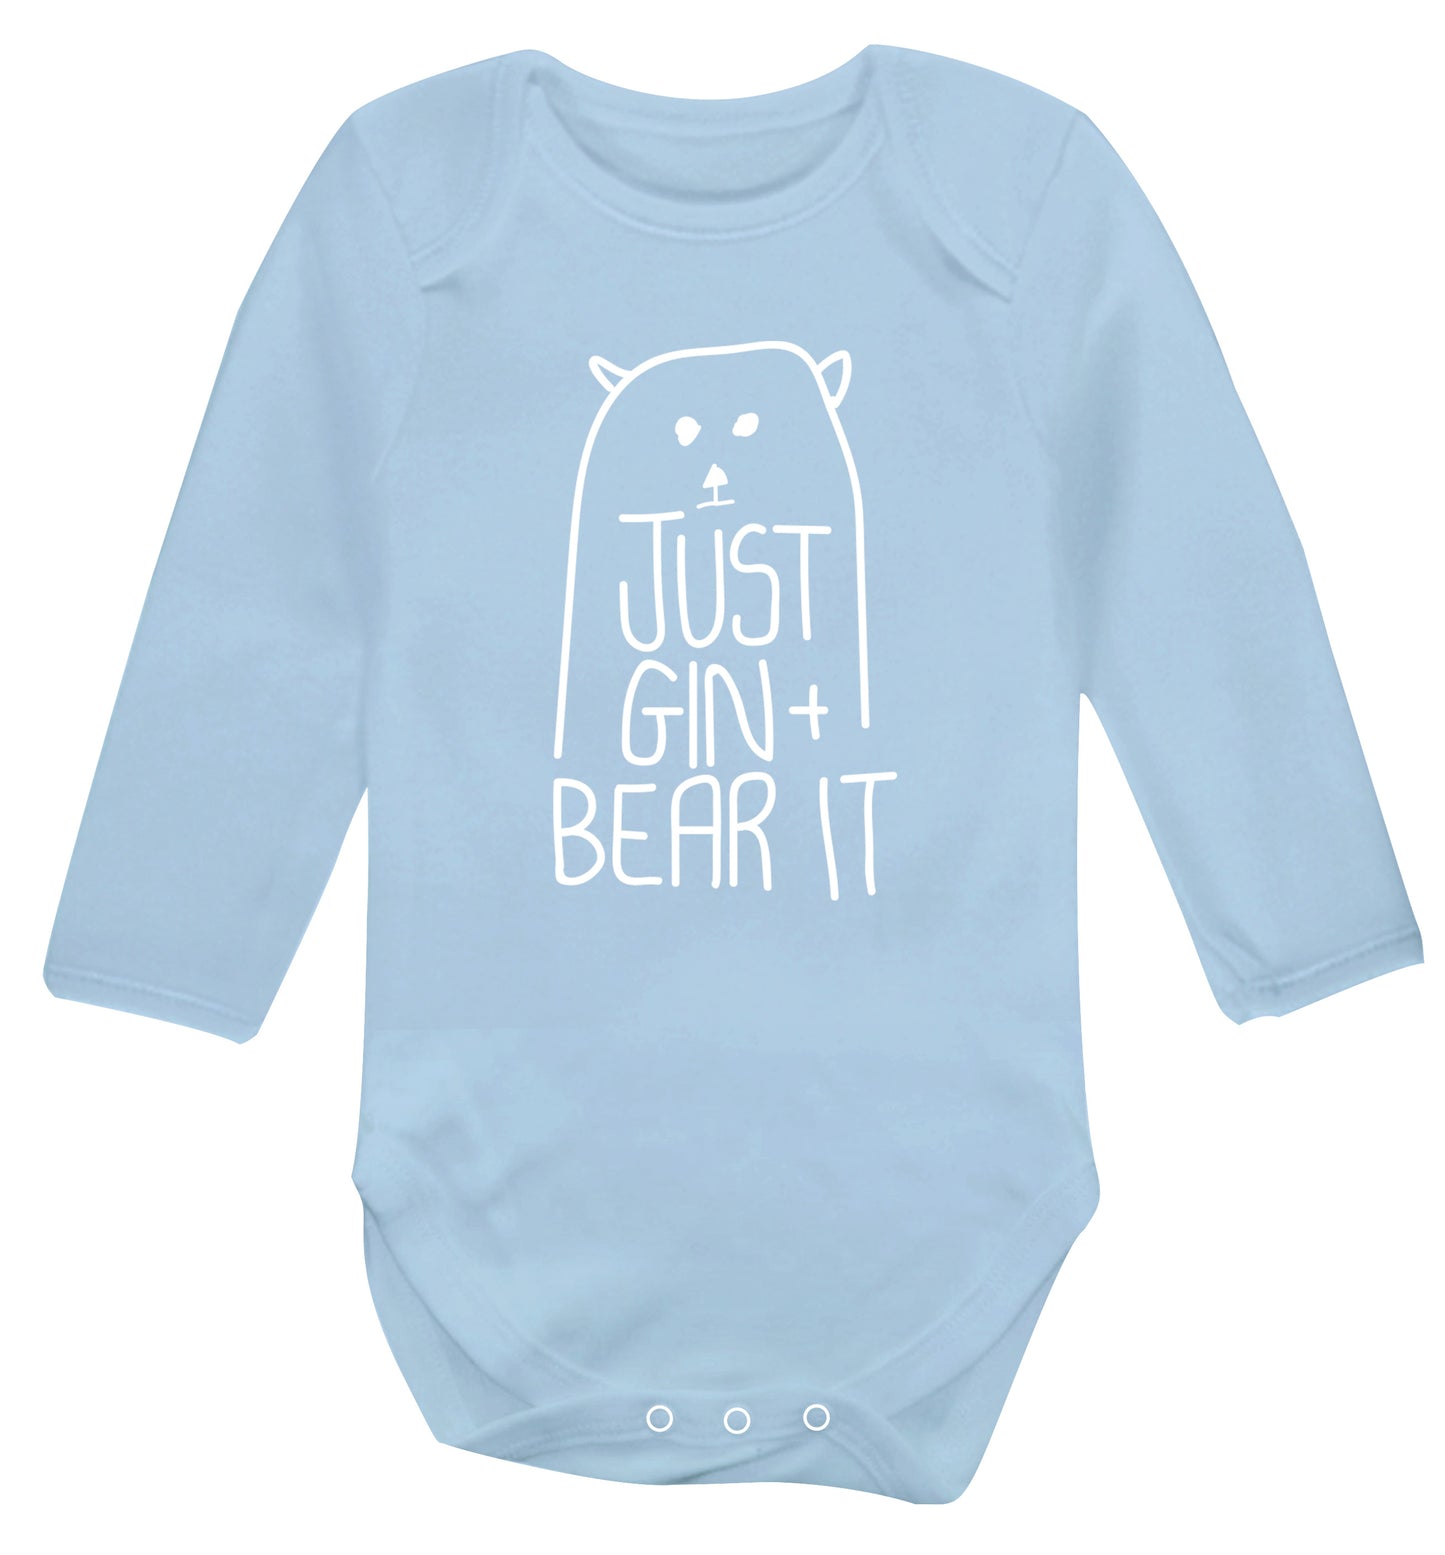 Just gin and bear it Baby Vest long sleeved pale blue 6-12 months